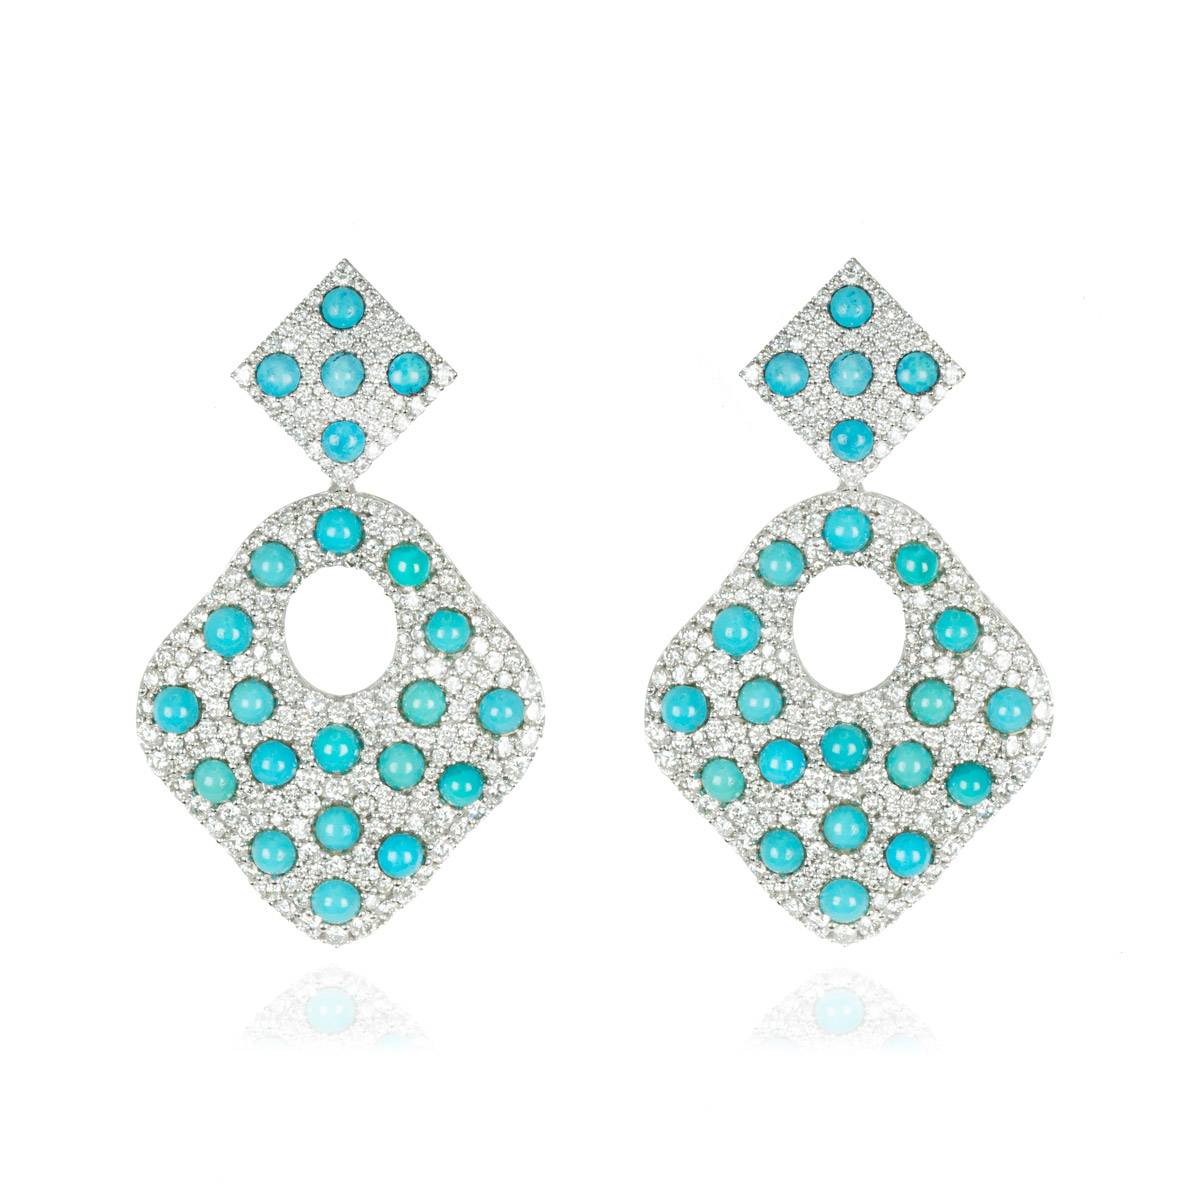 White Gold Diamond and Turquoise Drop Earrings